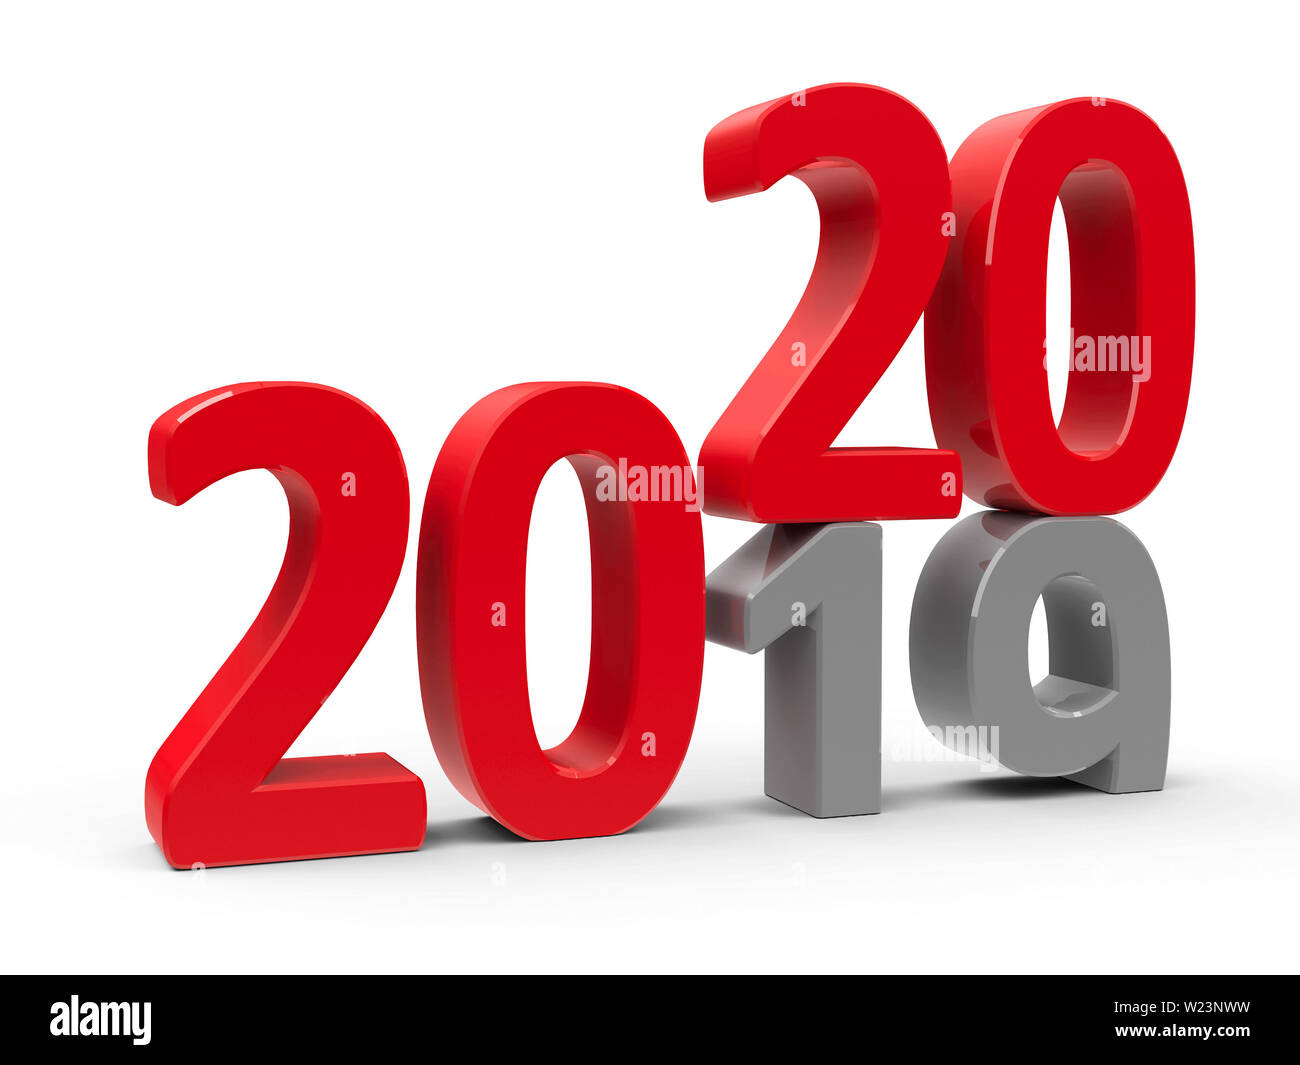 2019-2020 change represents the new year 2020, three-dimensional rendering, 3D illustration Stock Photo